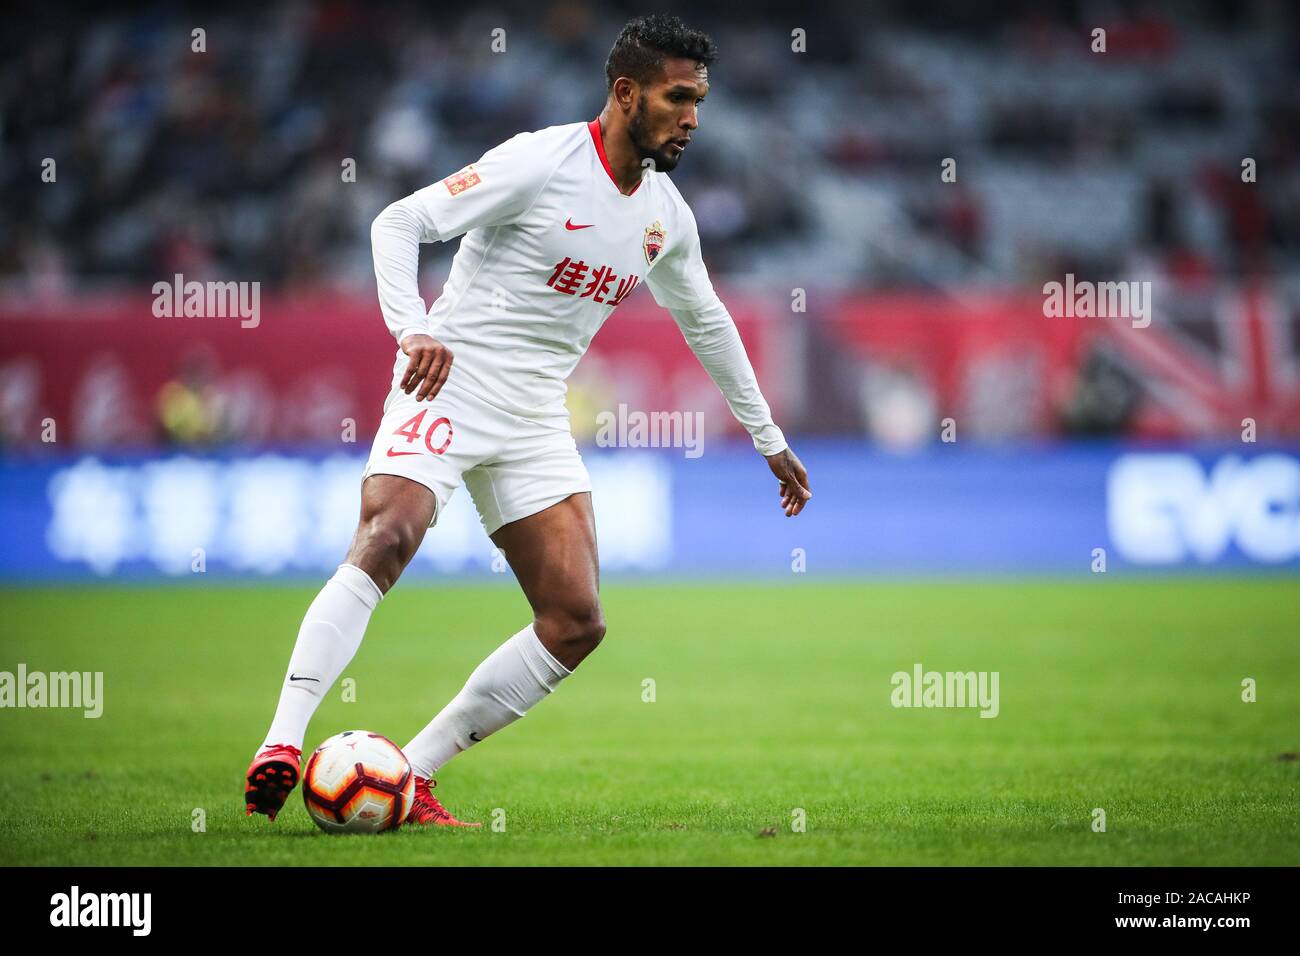 Brazilian-born Portuguese football player Dyego Sousa of Shenzhen F.C. keeps the ball during the 30th round match of Chinese Football Association Super League (CSL) against Shanghai SIPG in Shanghai, China, 1 December 2019. Shanghai SIPG slashed Shenzhen F.C. with 6-0. Stock Photo